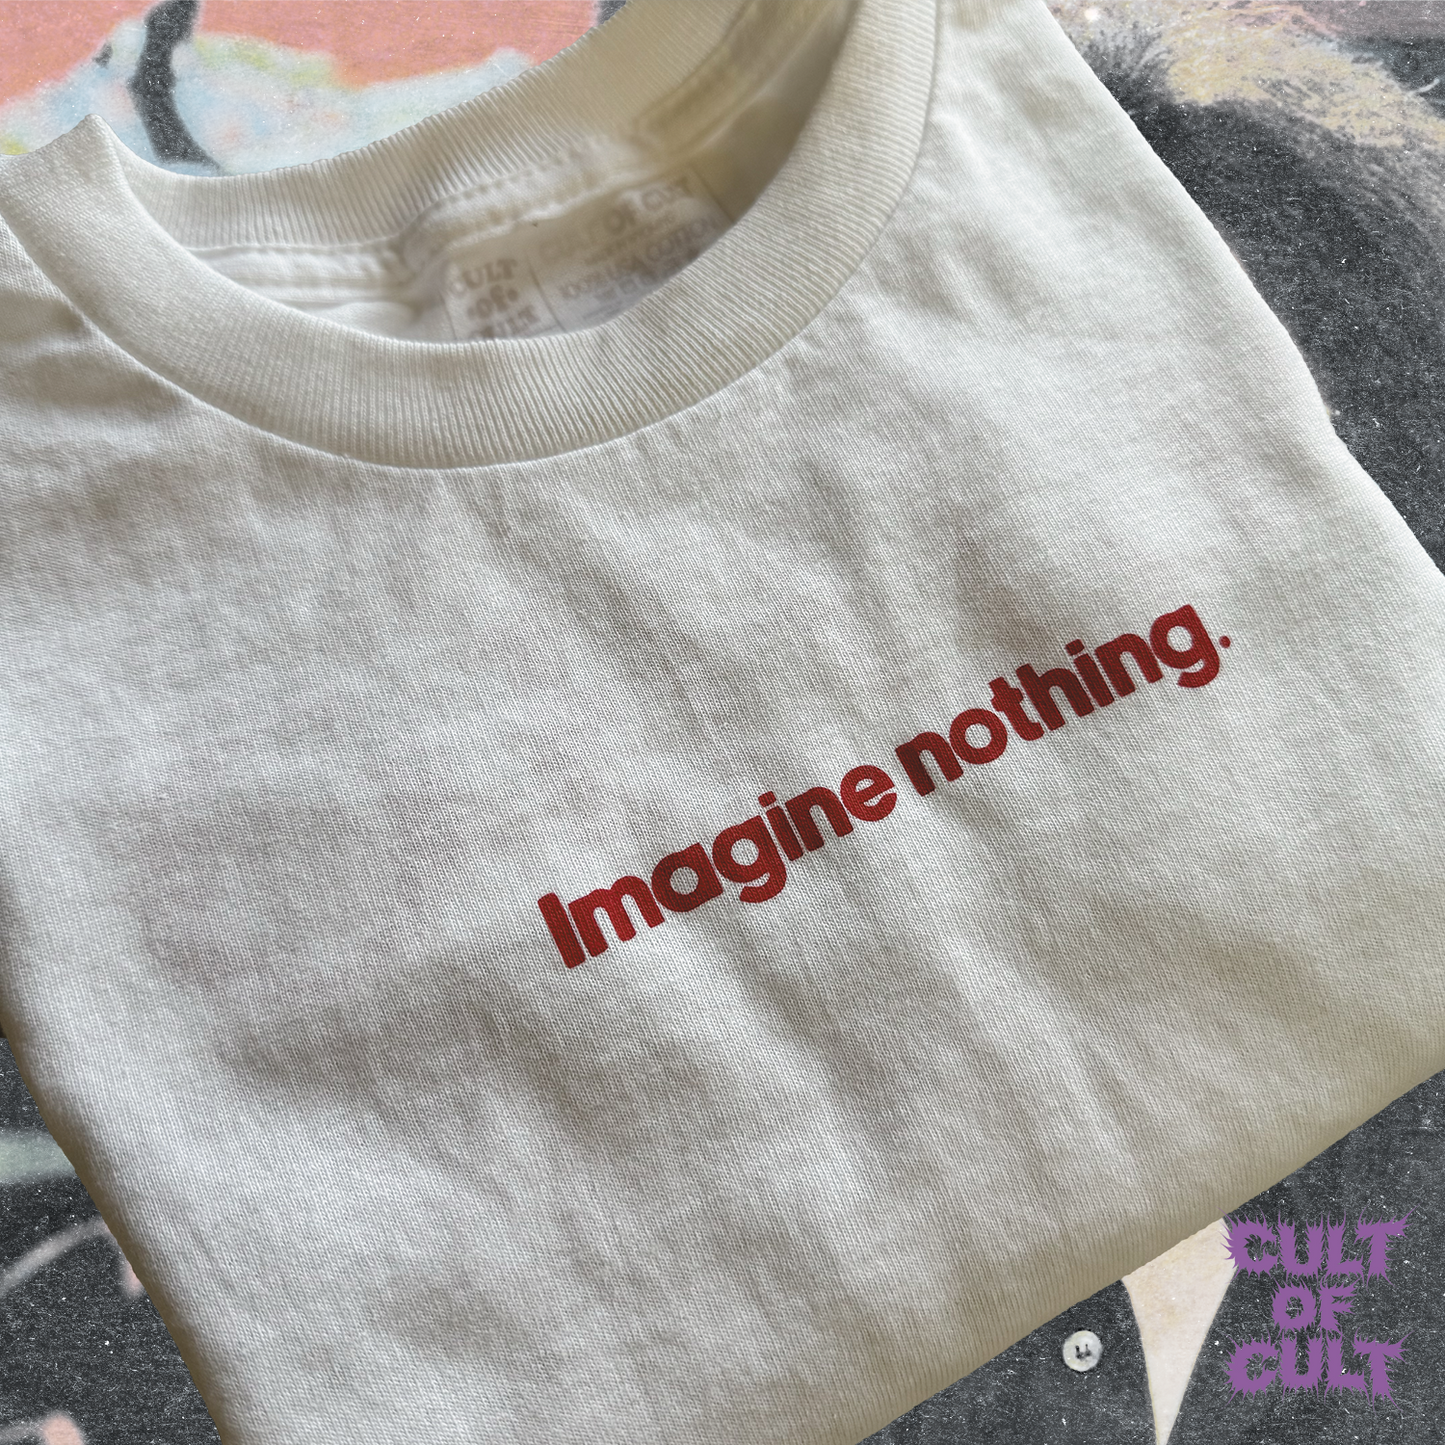 A zoomed in view of the front of the shirt. It reads "Imagine nothing." small and centered on the front chest, with red ink.